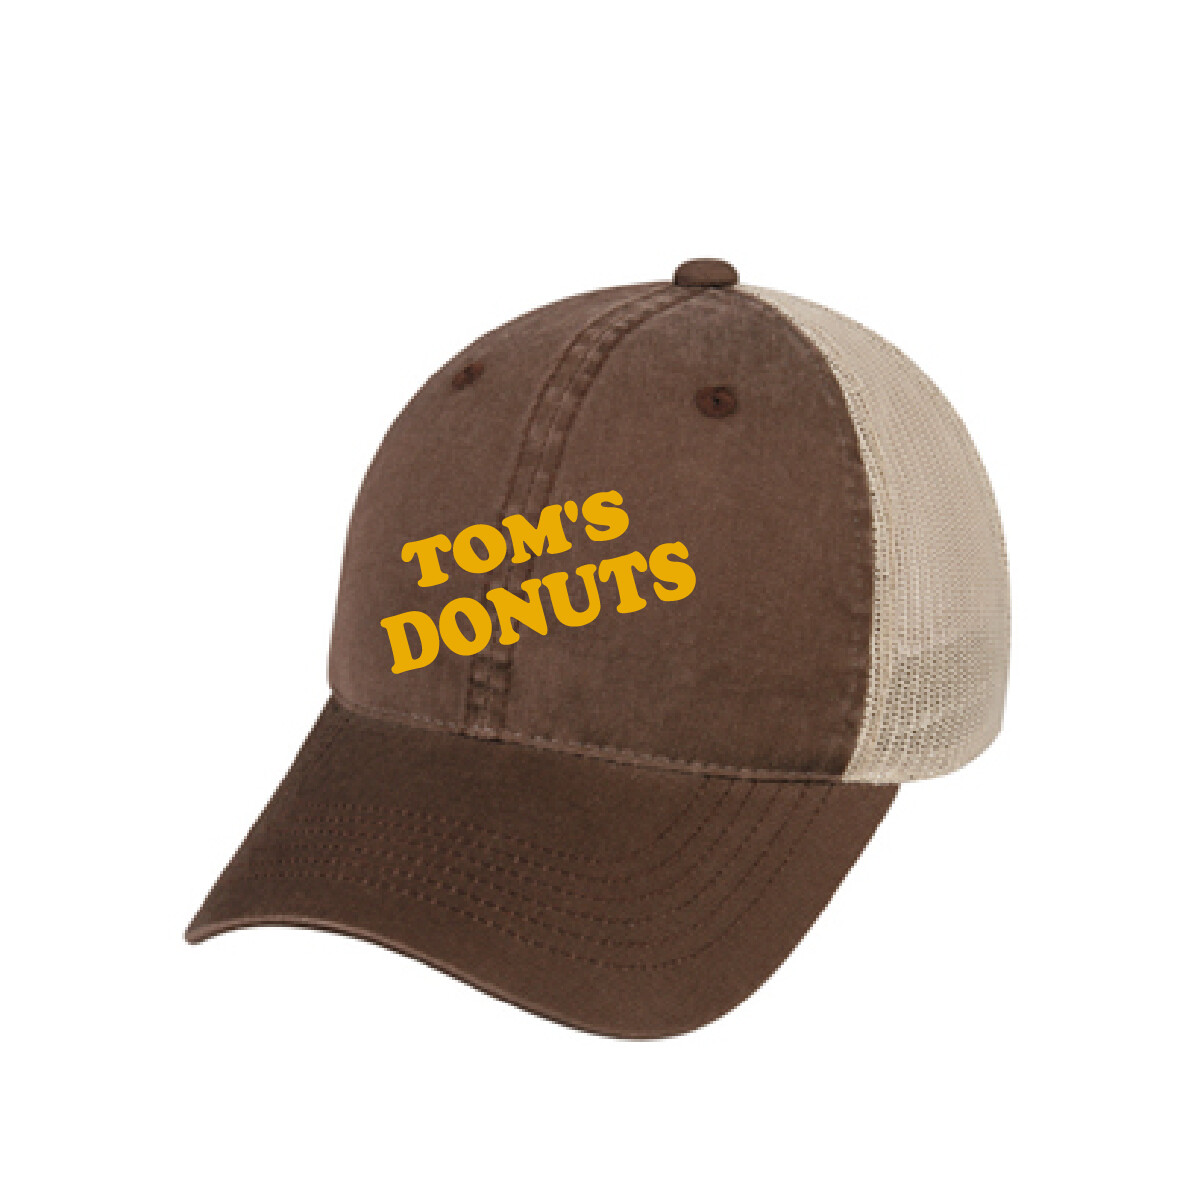 Tom's Donuts Hat - Brown with Yellow Lettering